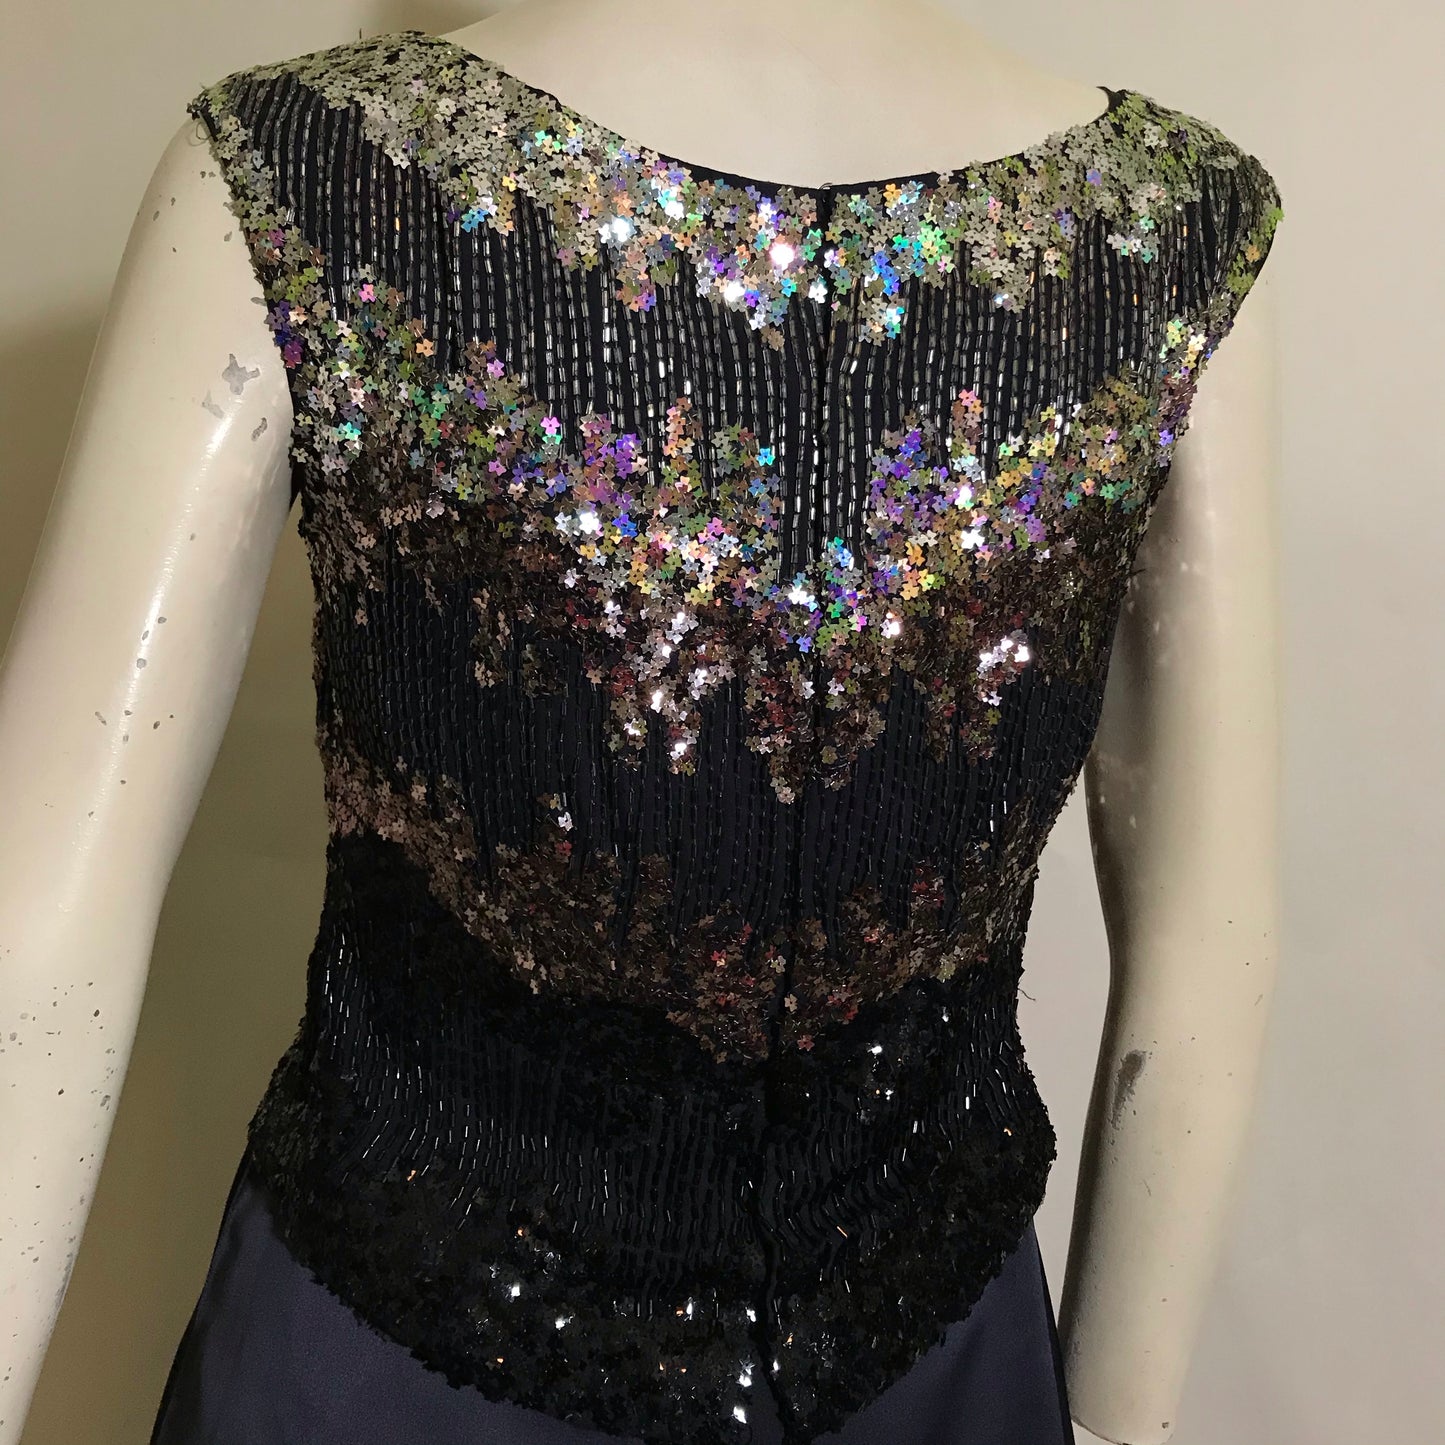 Sparkling Silver Star Sequined Bodice 3 Pc Deep Blue Silk Dress with Jacket circa 1960s